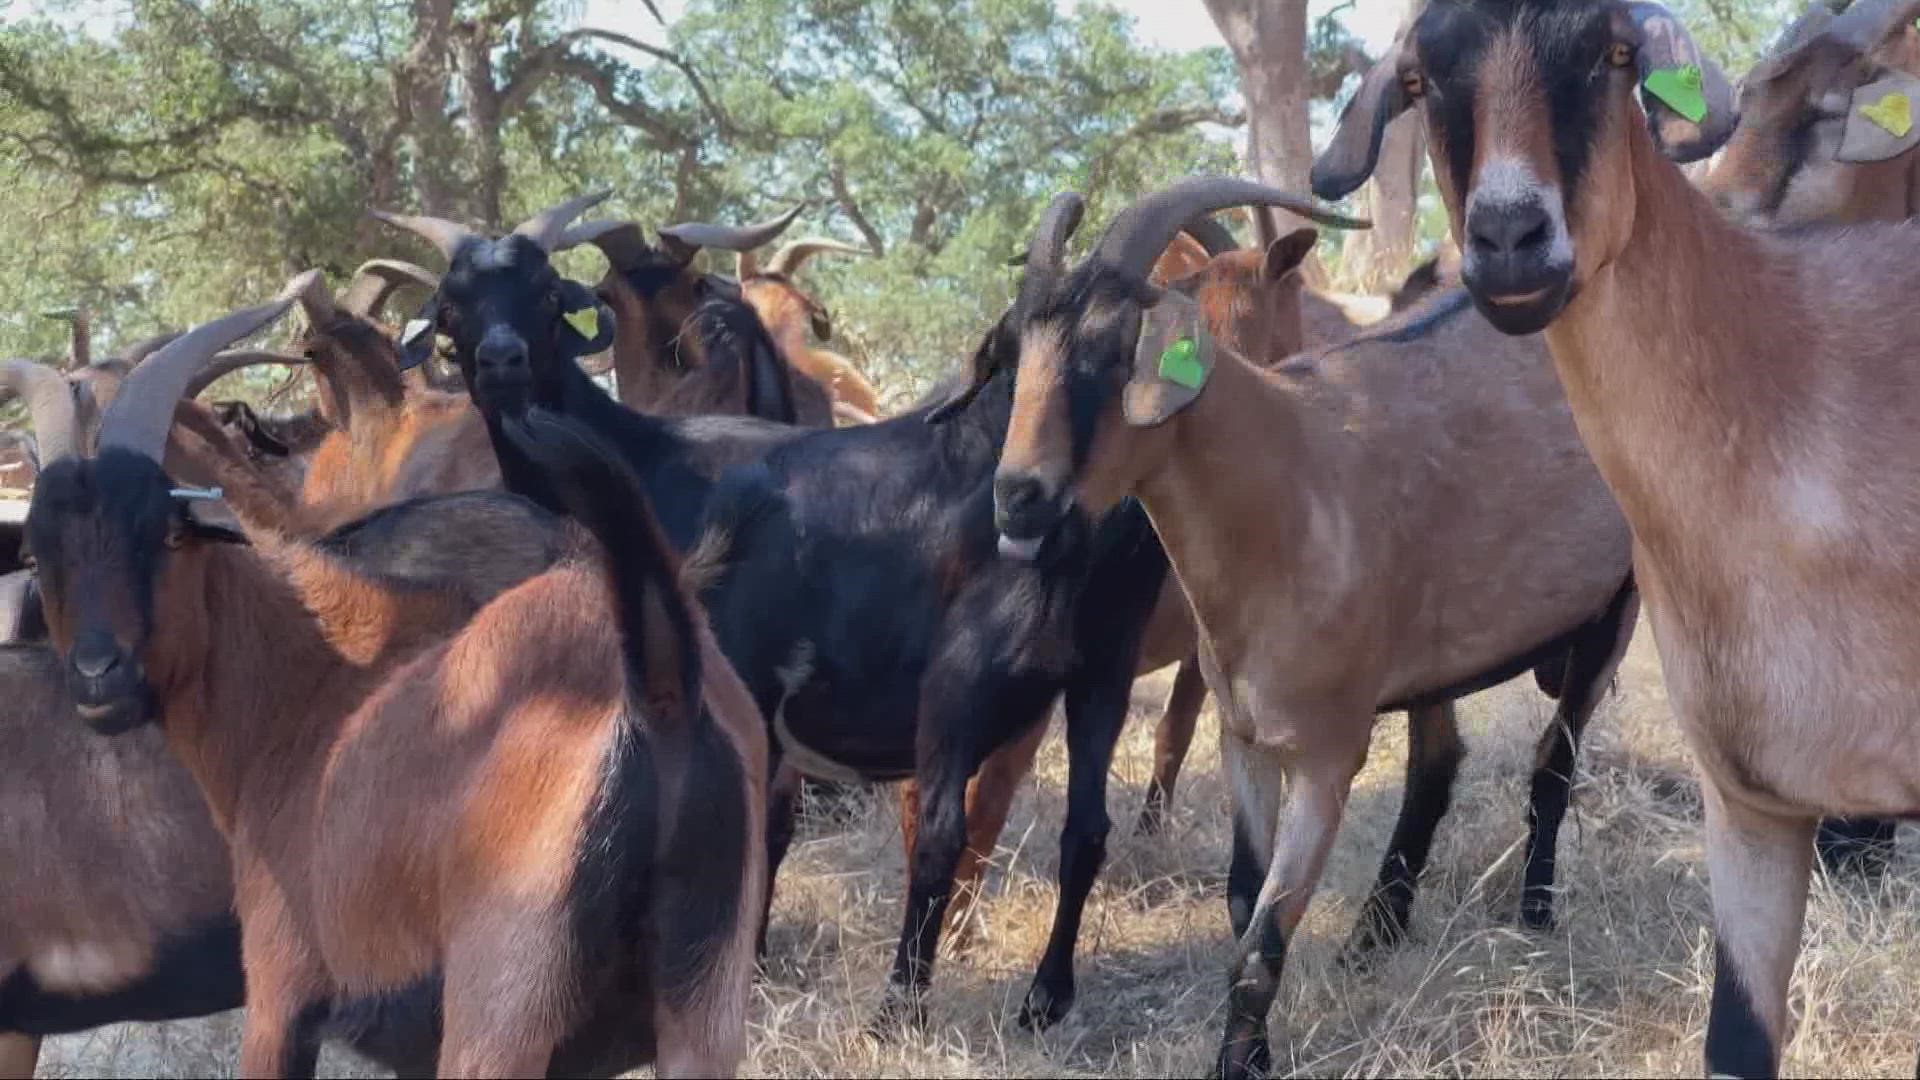 The Rocklin Fire Department said these goats are mowing lawns and eating overgrowth to help prevent wildfires in Placer County.